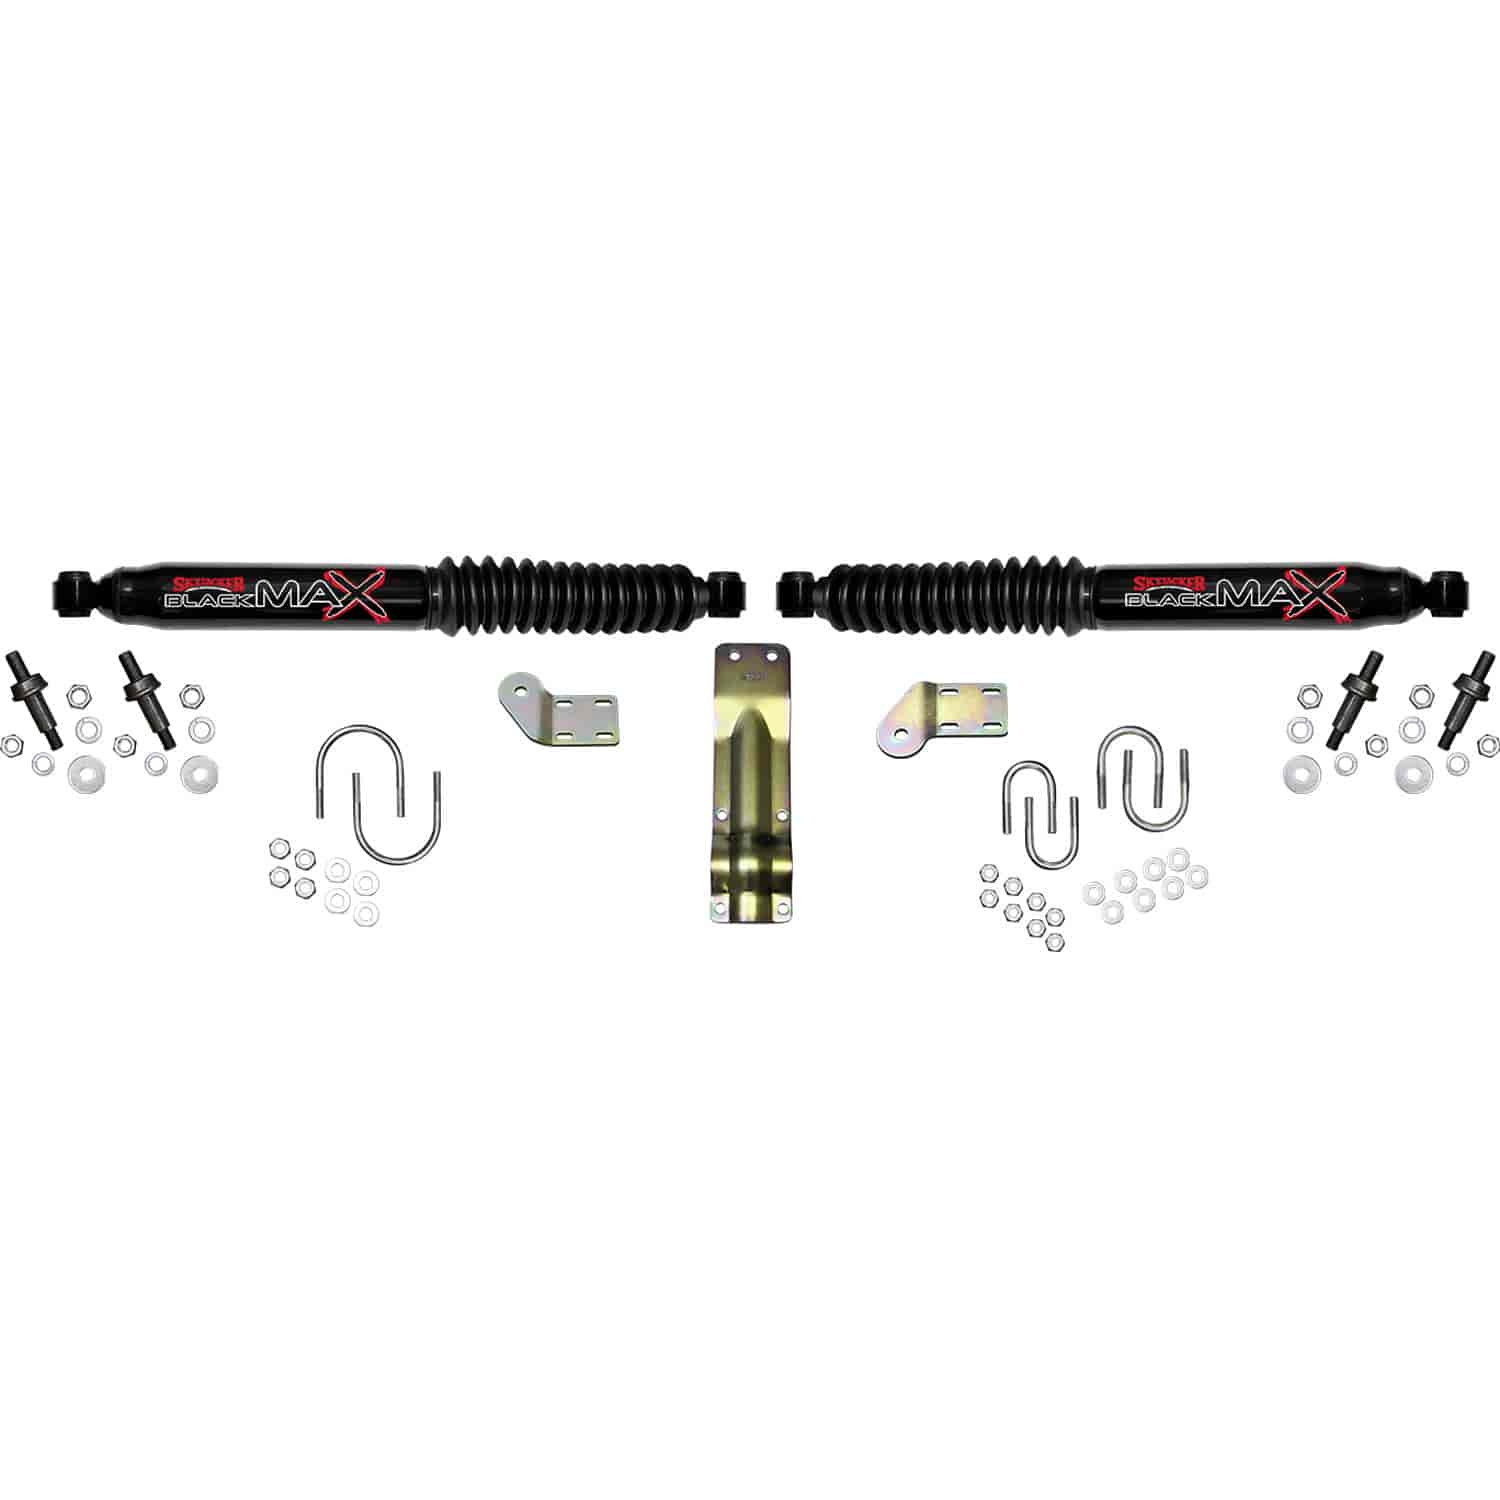 Dual Black MAX Stabilizer 1998-2002 for Dodge Ram 3/4, 1 Ton 4WD with 3-3/4" Axle Tube